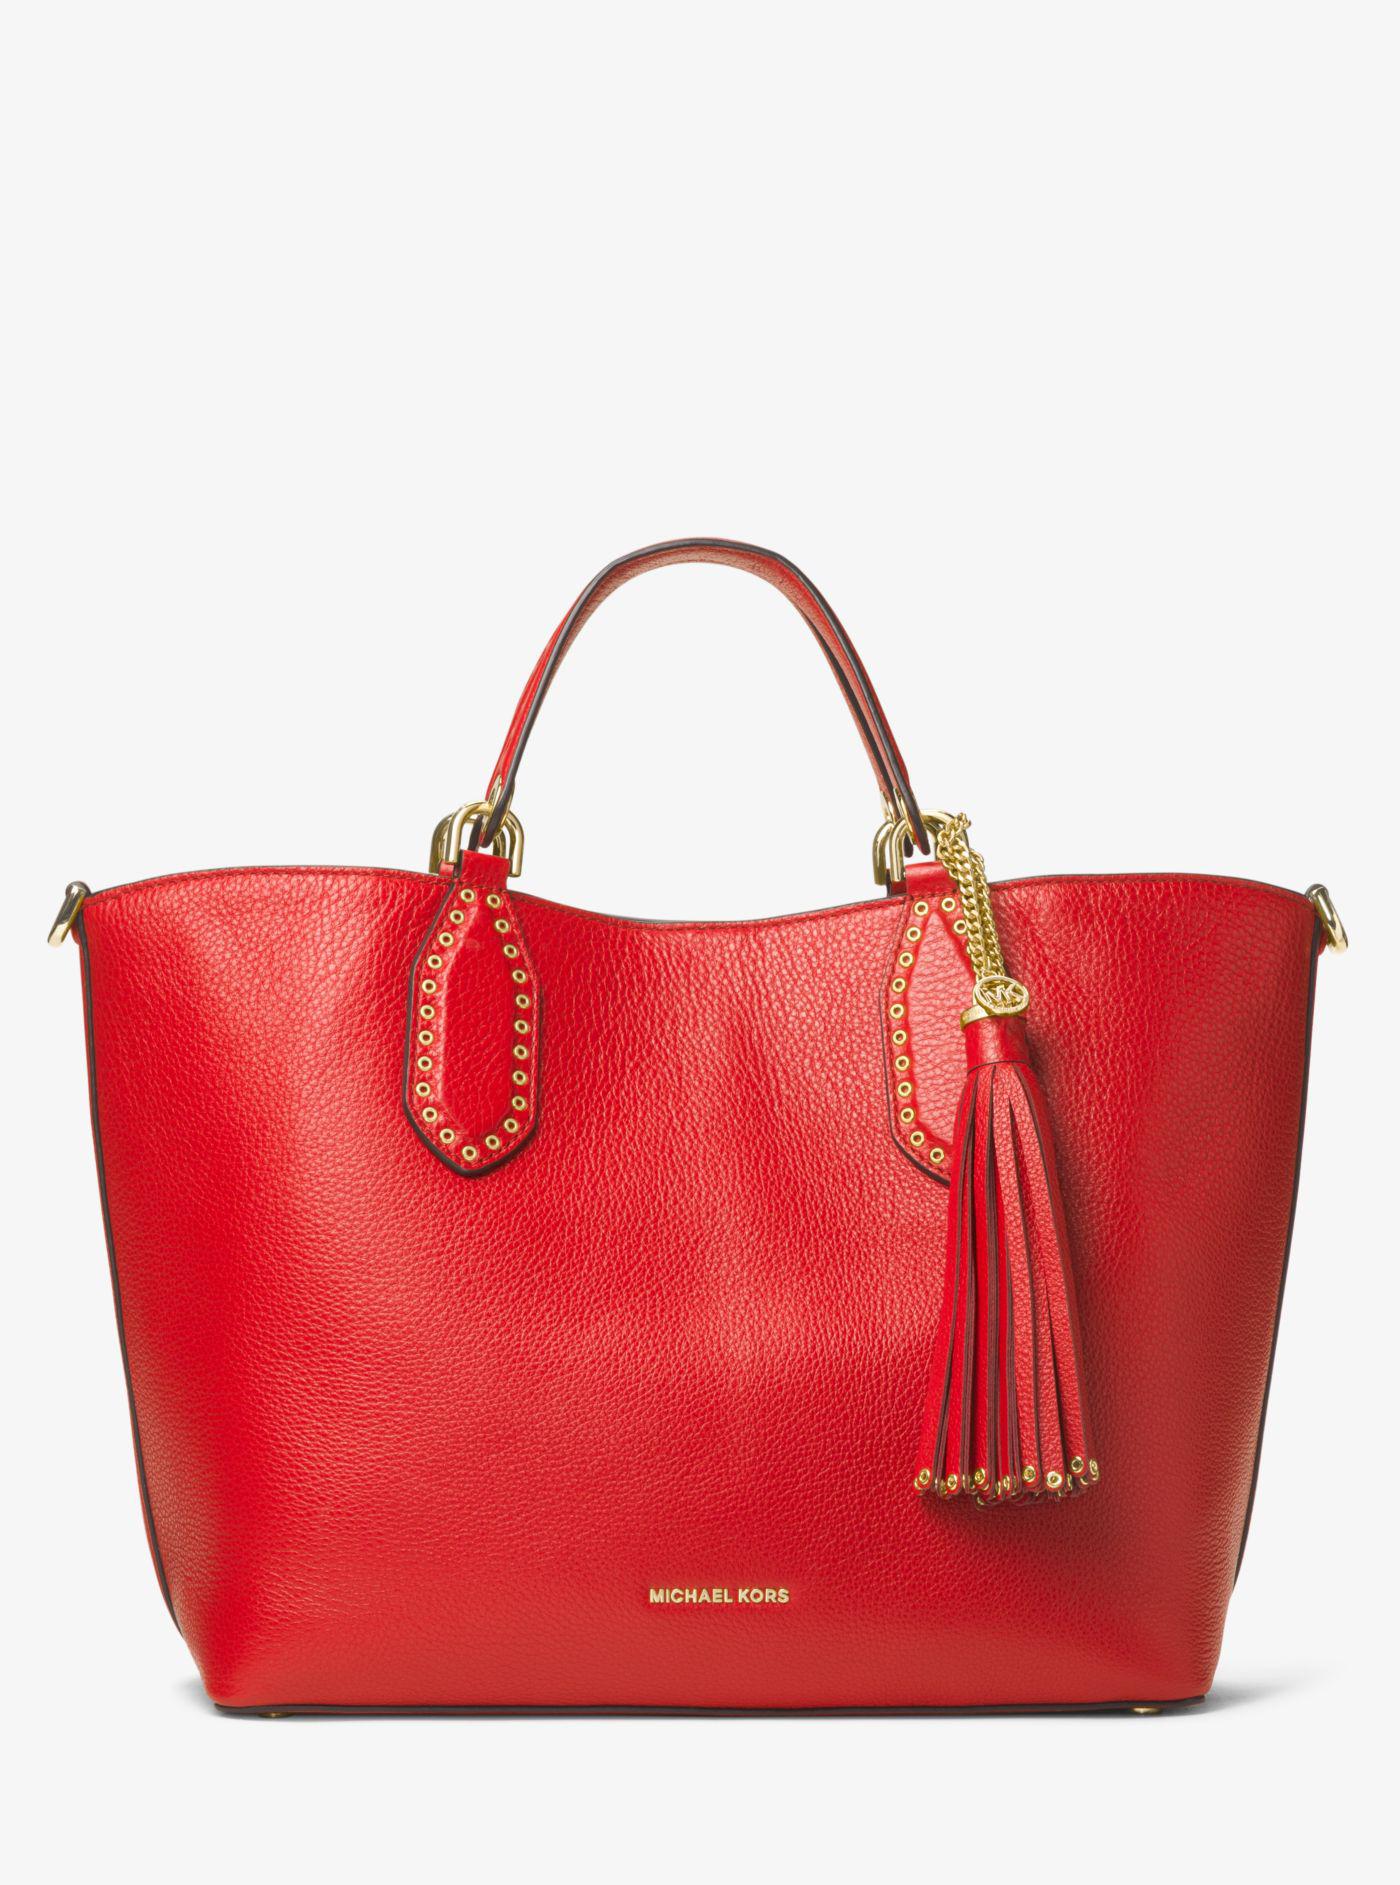 Michael Kors Brooklyn Large Leather Satchel in Red | Lyst